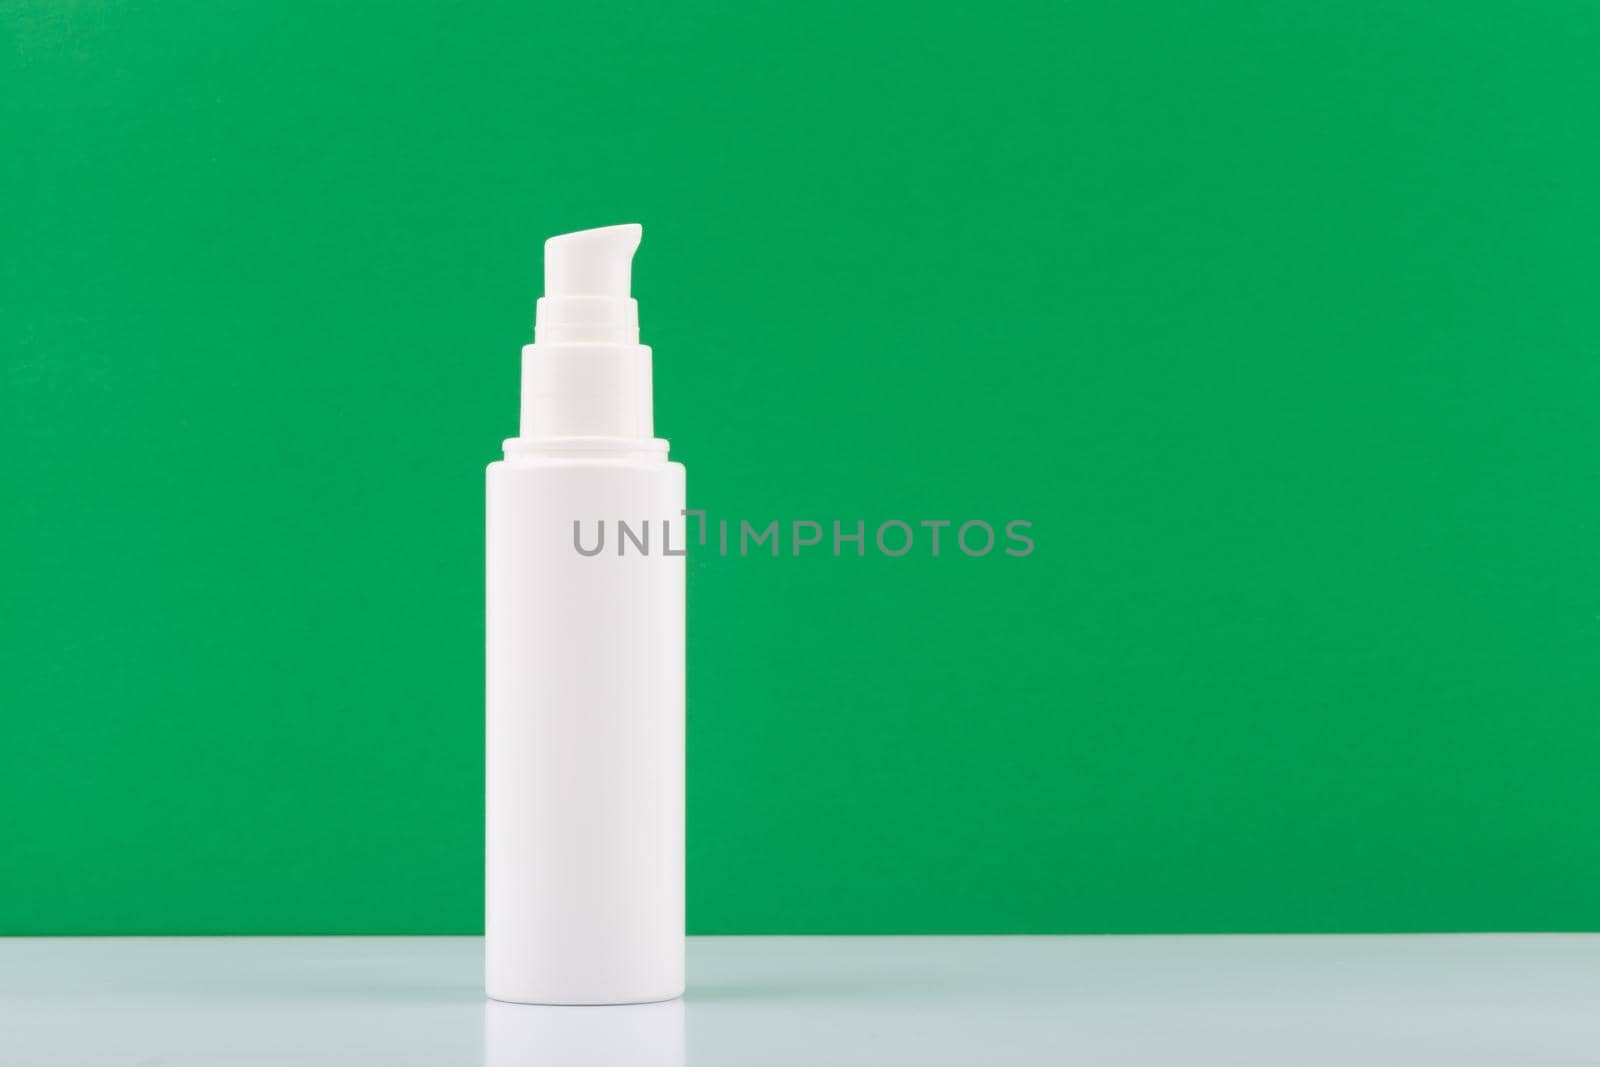 Cream, gel or lotion in white tube against green background with copy space. Concept of organic skin care products by Senorina_Irina